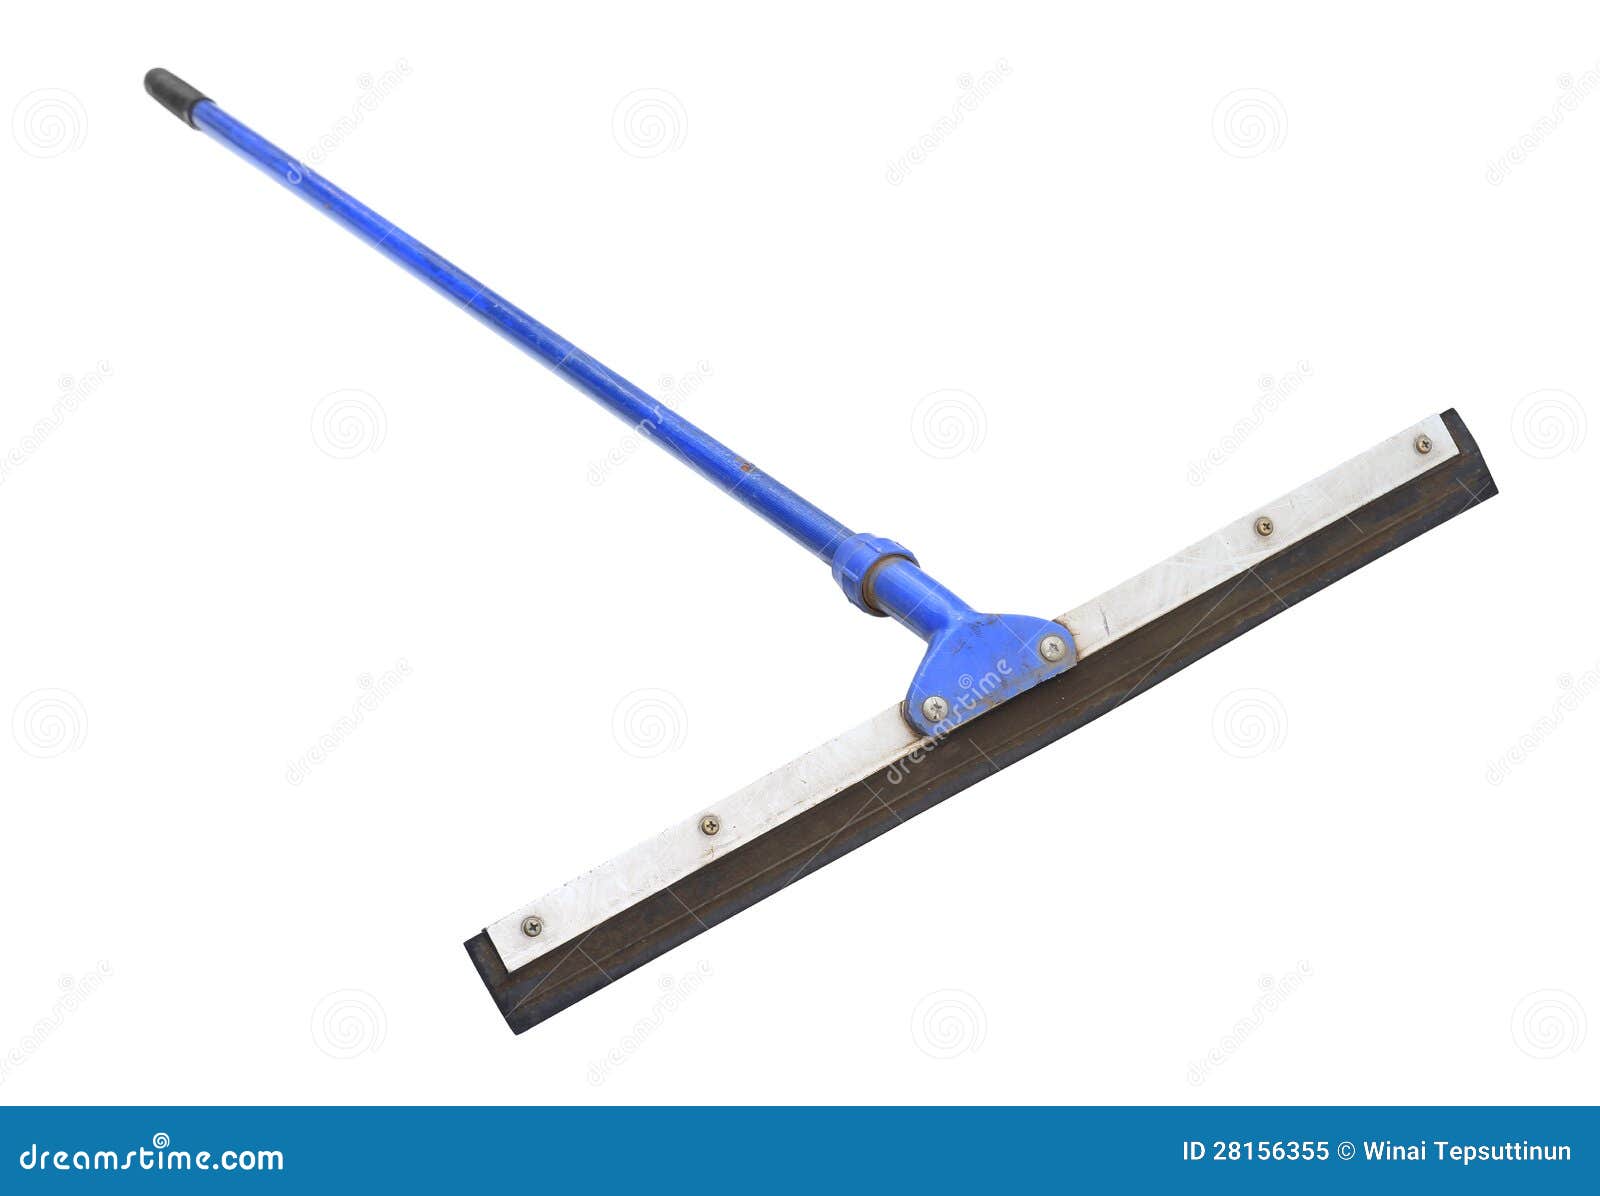 window squeegee clipart - photo #47